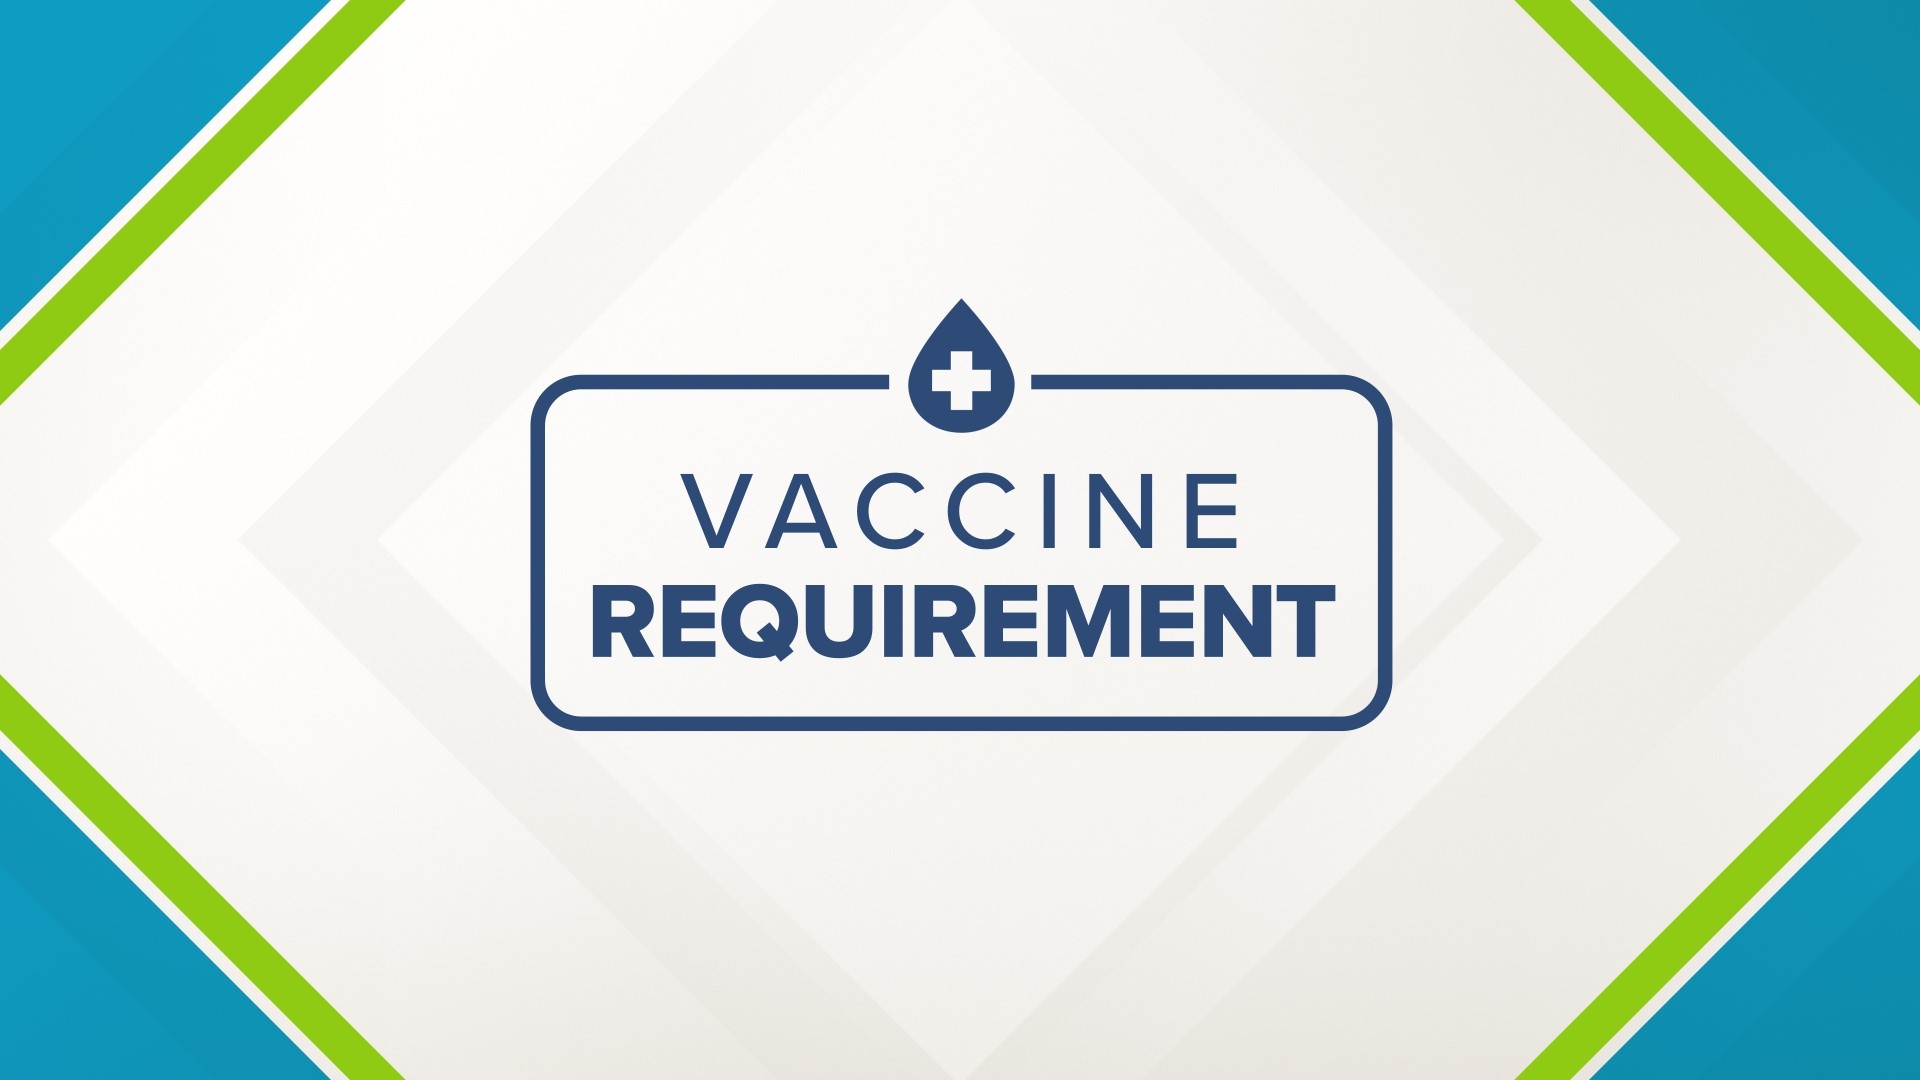 A CDC committee voted to add the COVID-19 vaccine to the recommended immunization schedule for children and adults.